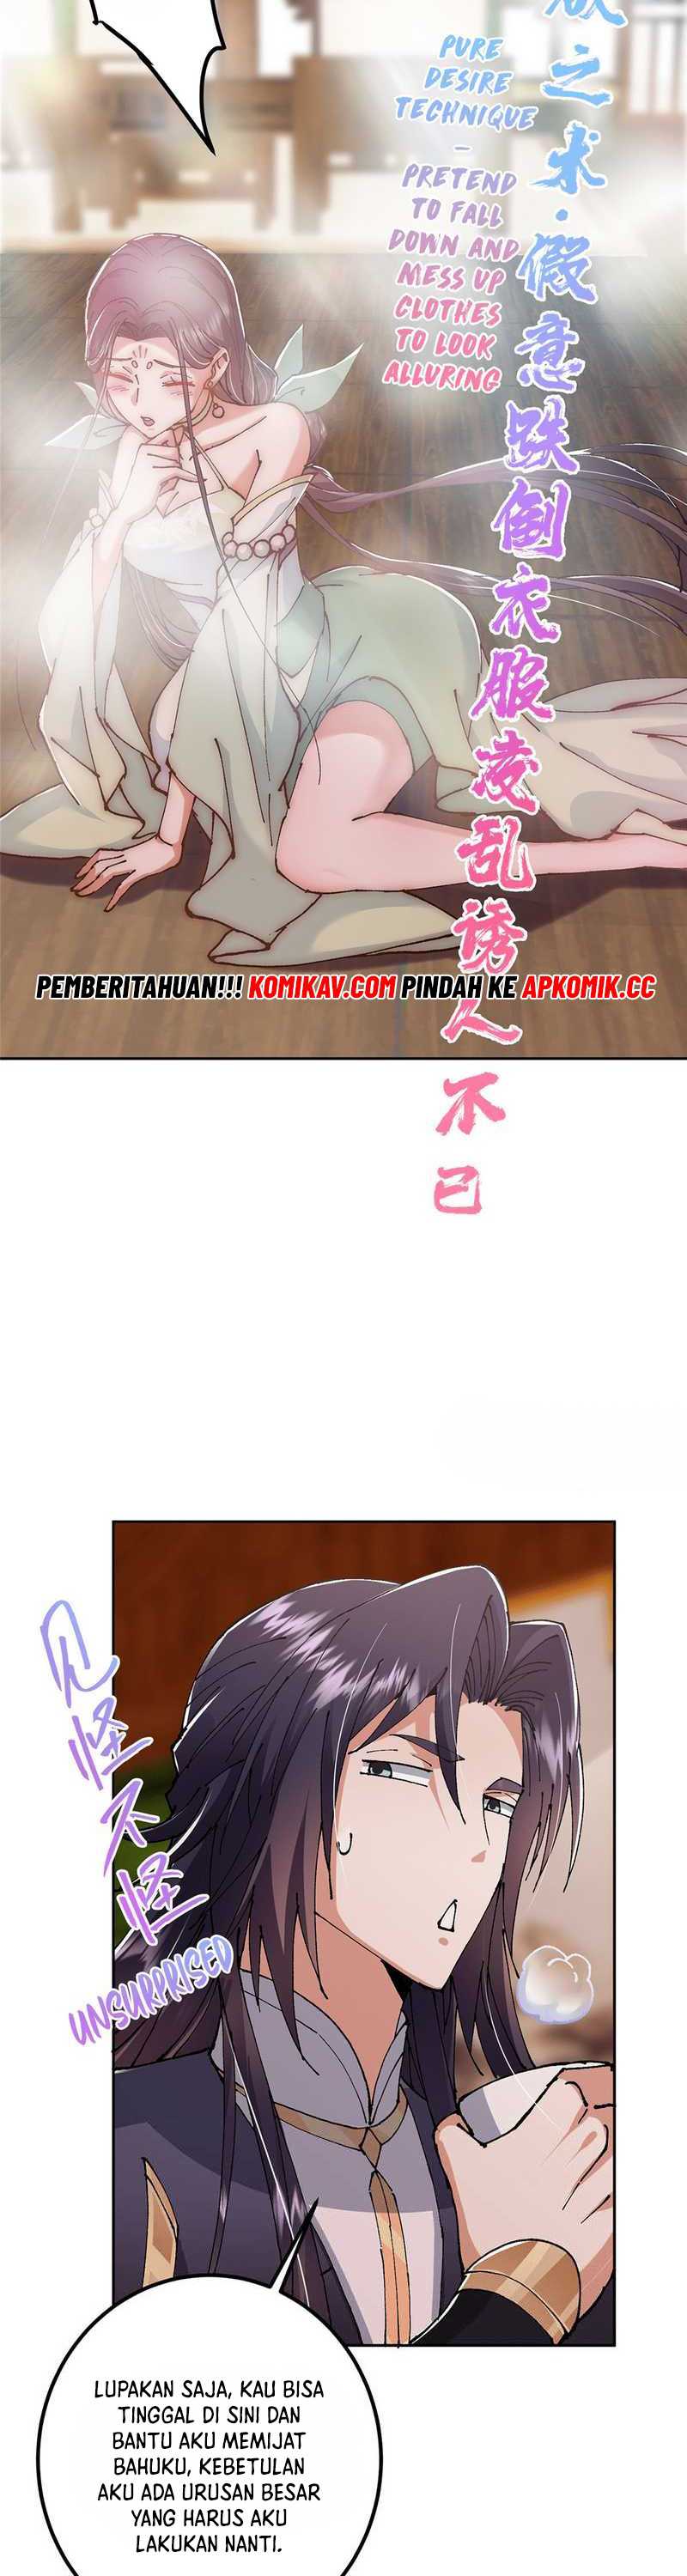 Keep A Low Profile, Sect Leader Chapter 337 Image 13